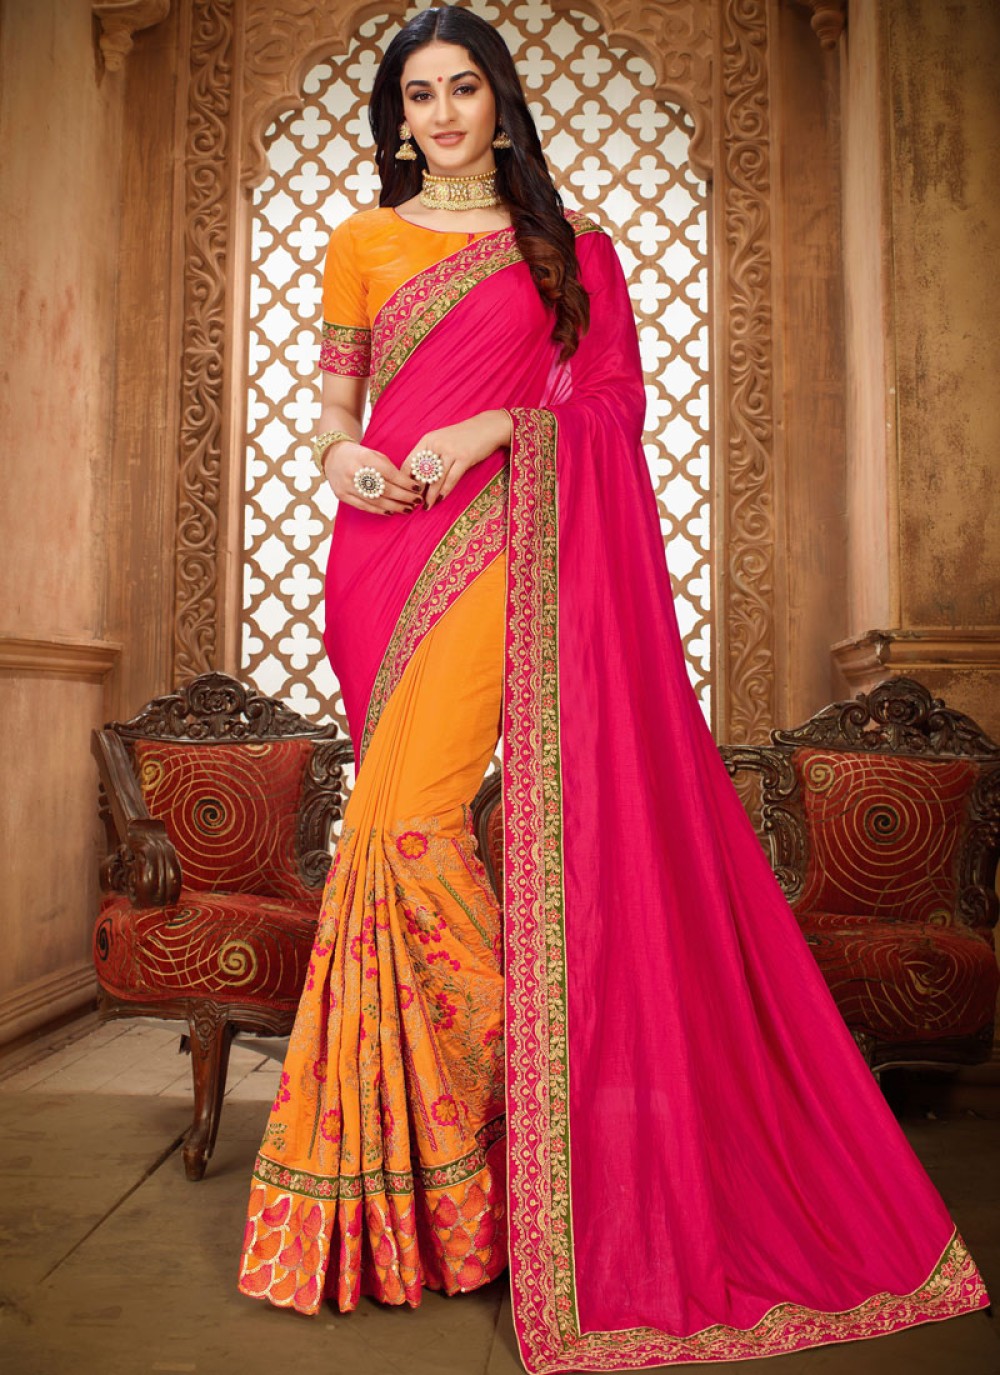 Hot Pink and Yellow Patch Border Saree ...